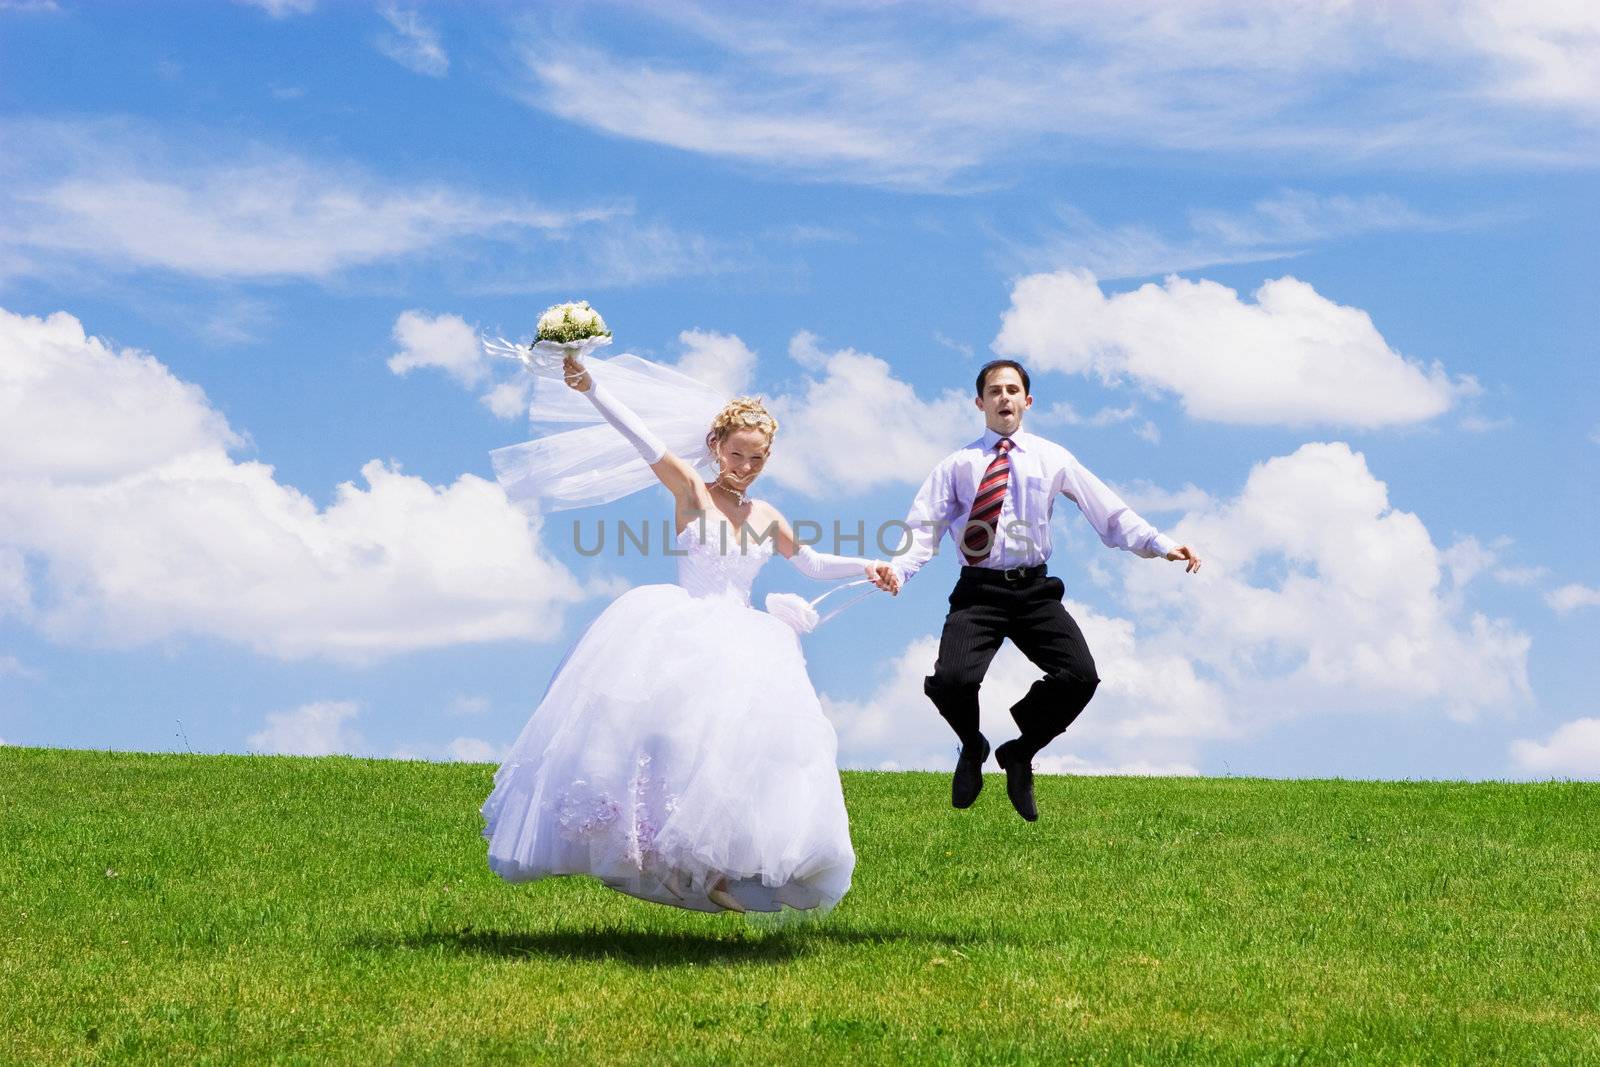 jumping newly-married couple by vsurkov